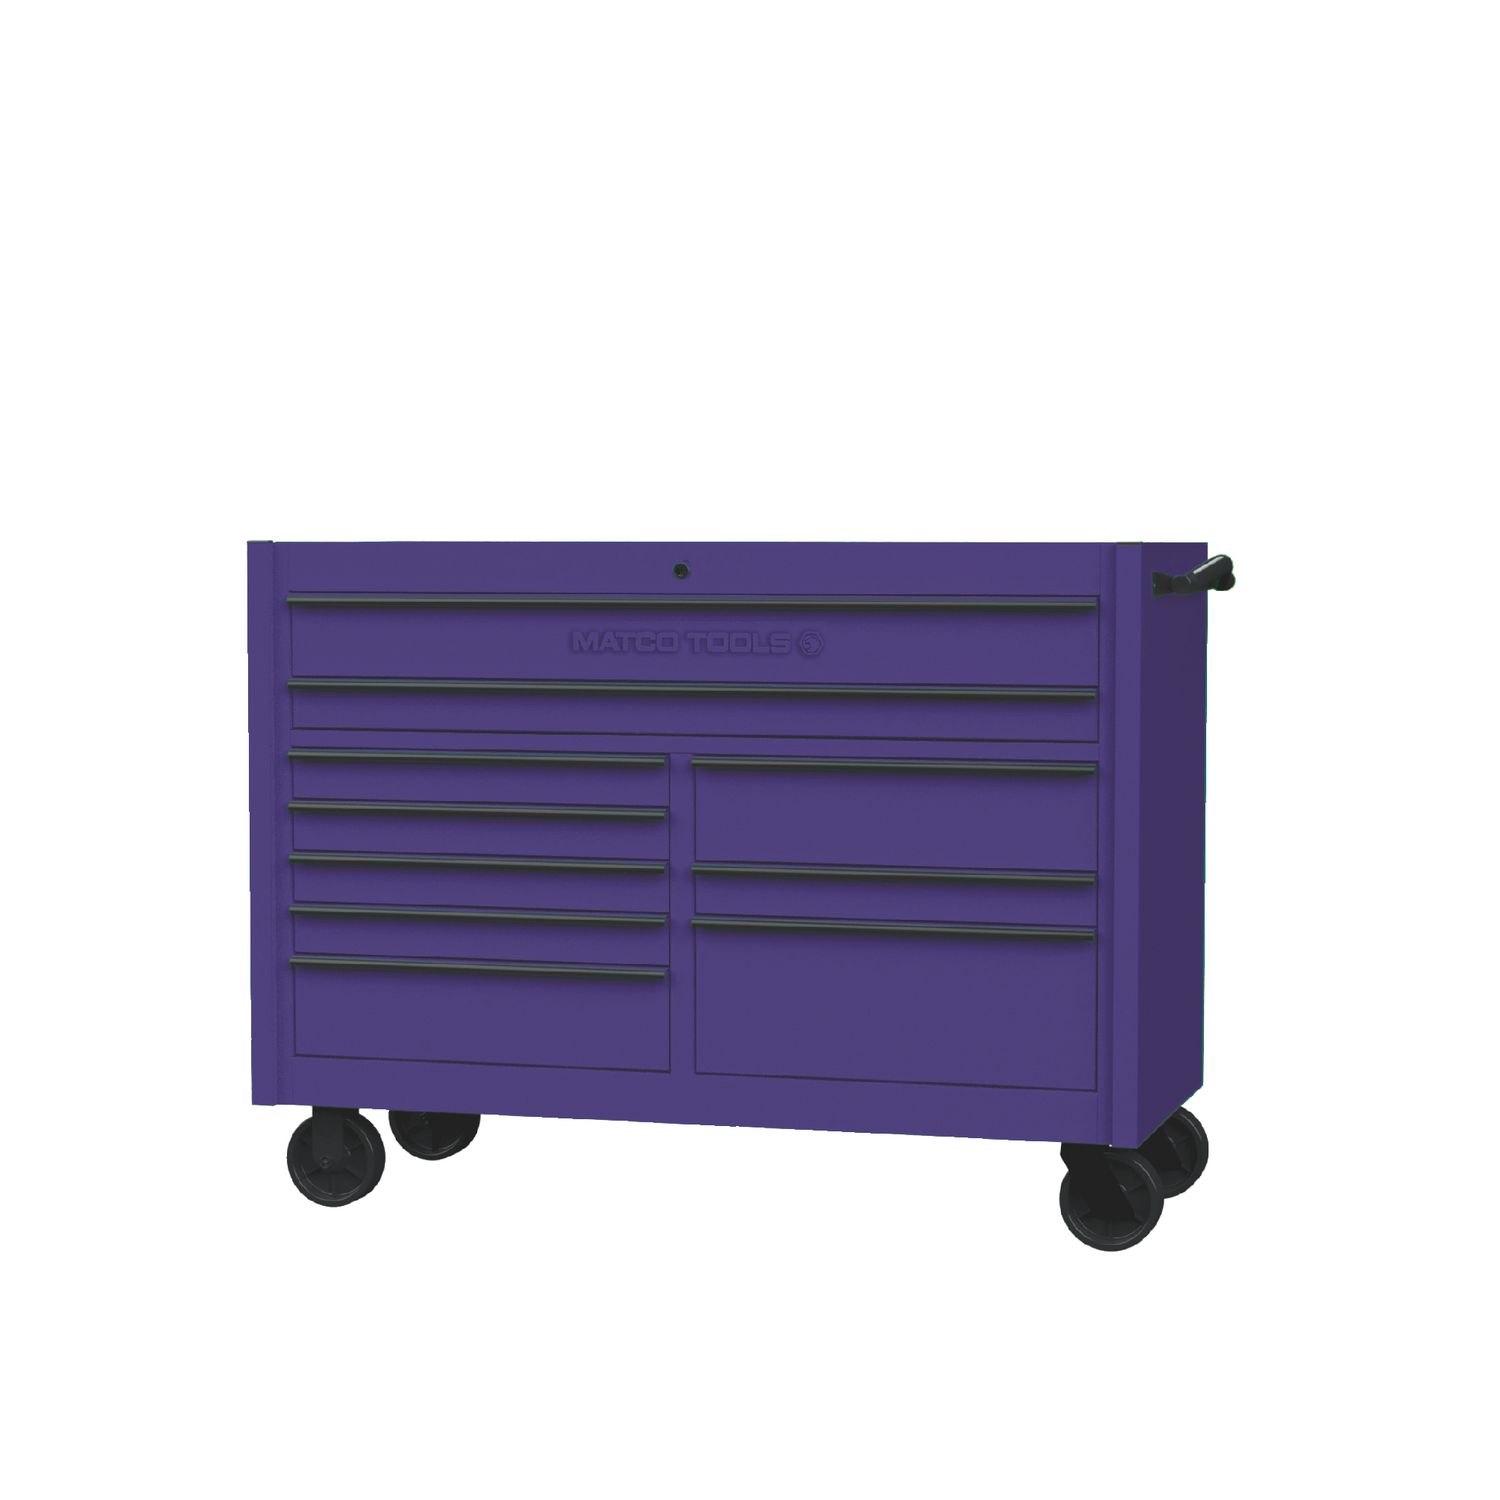 4225RX DOUBLE BAY 25 TOOLBOX ELECTRIC PURPLE WITH BLACK TRIM 4225RX-PPB